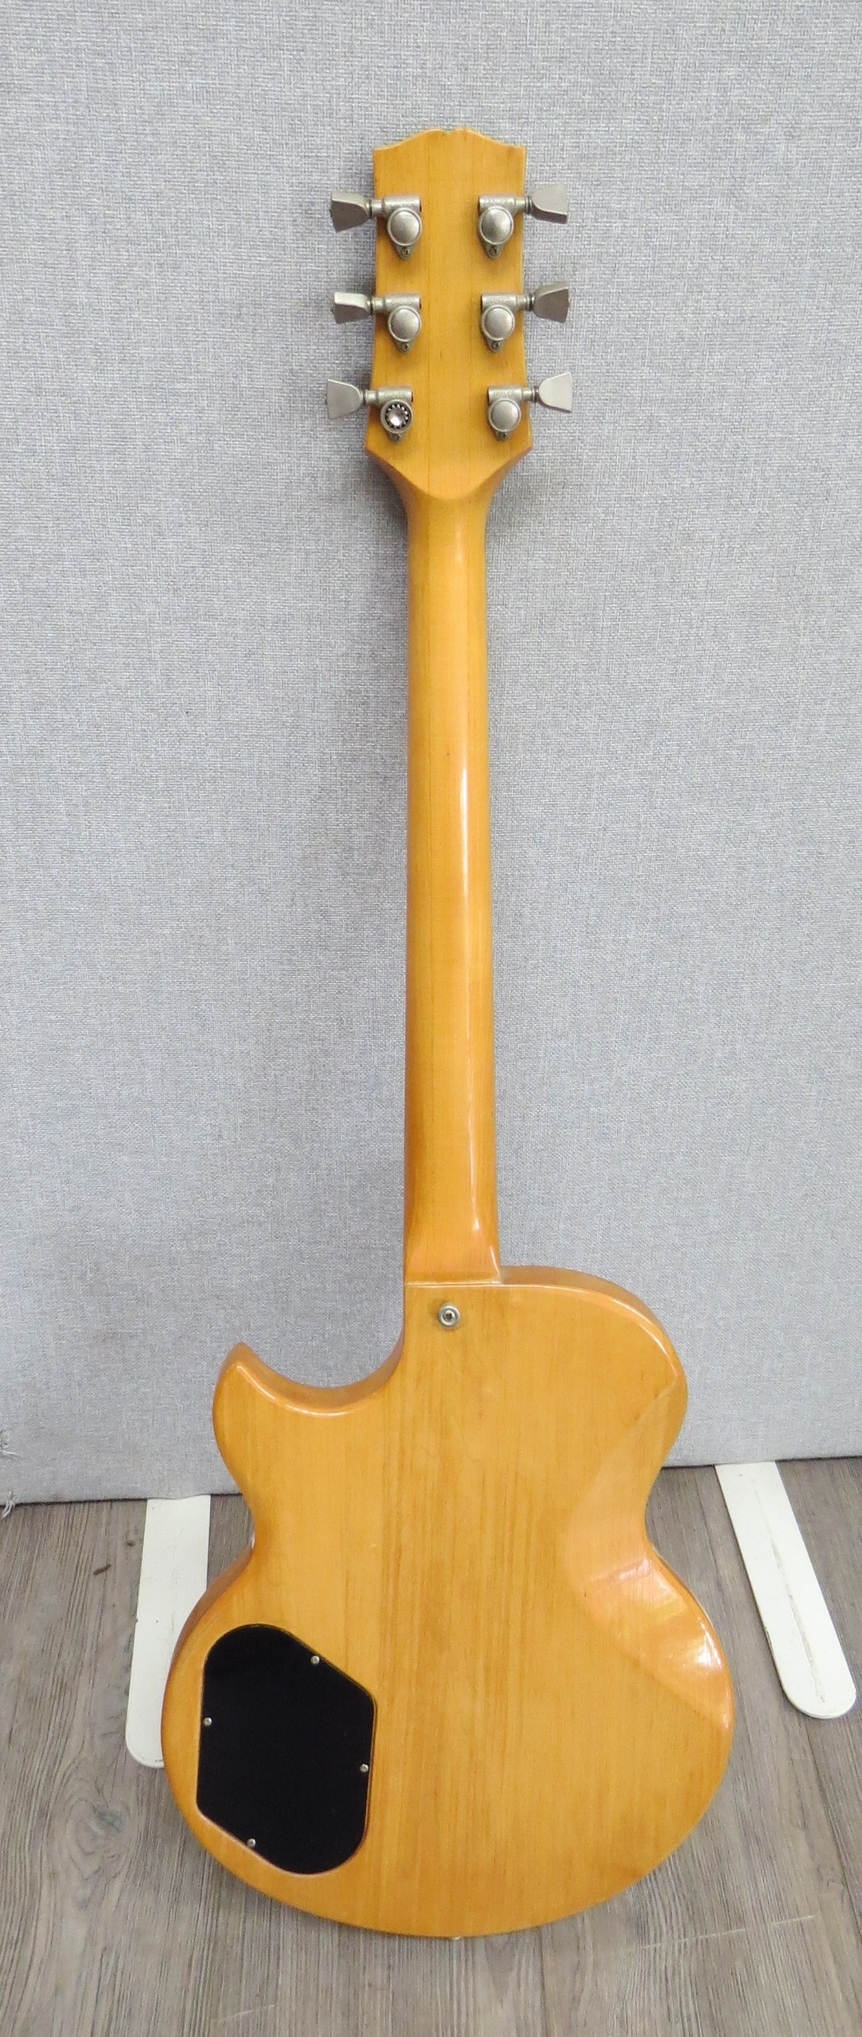 A Gibson L6-S electric guitar with maple body and neck, black pickguard, twin humbucker pickups, - Image 4 of 6